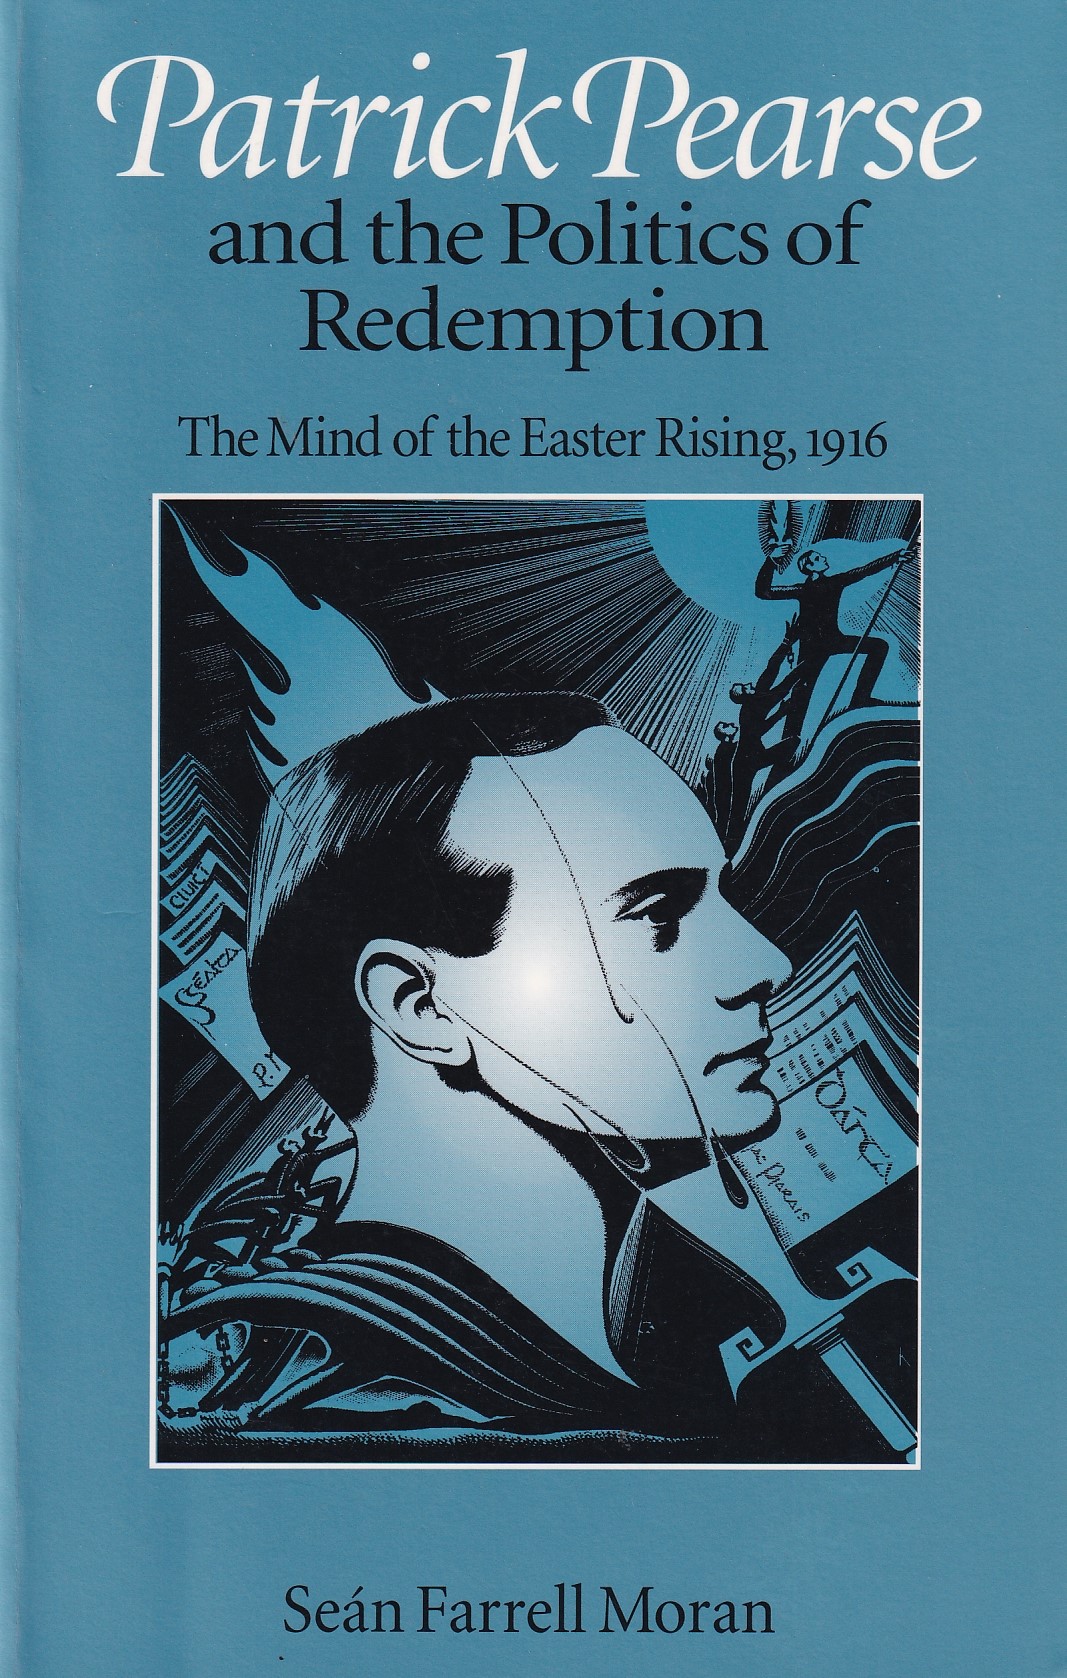 Patrick Pearse and the Politics of Redemption: The Mind of the Easter Rising, 1916 by Seán Farrell Moran